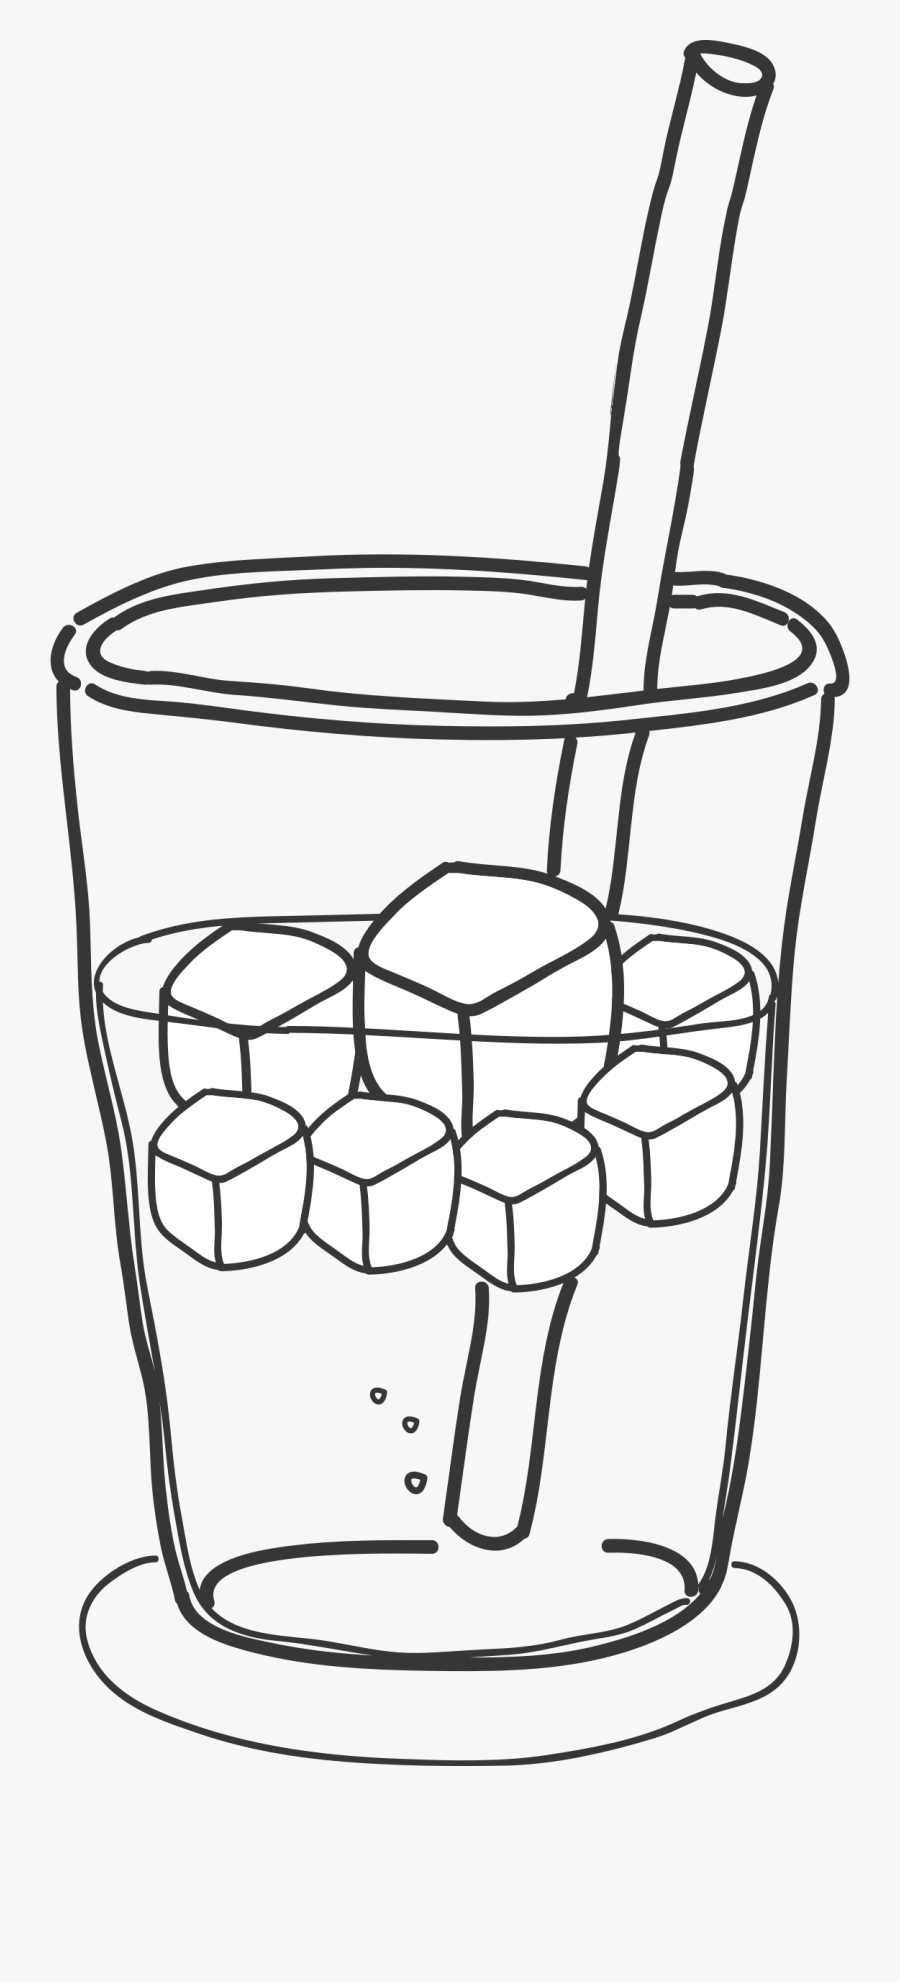 Clip Art Ice Drawing - Ice Drink Clipart Black And White, Transparent Clipart